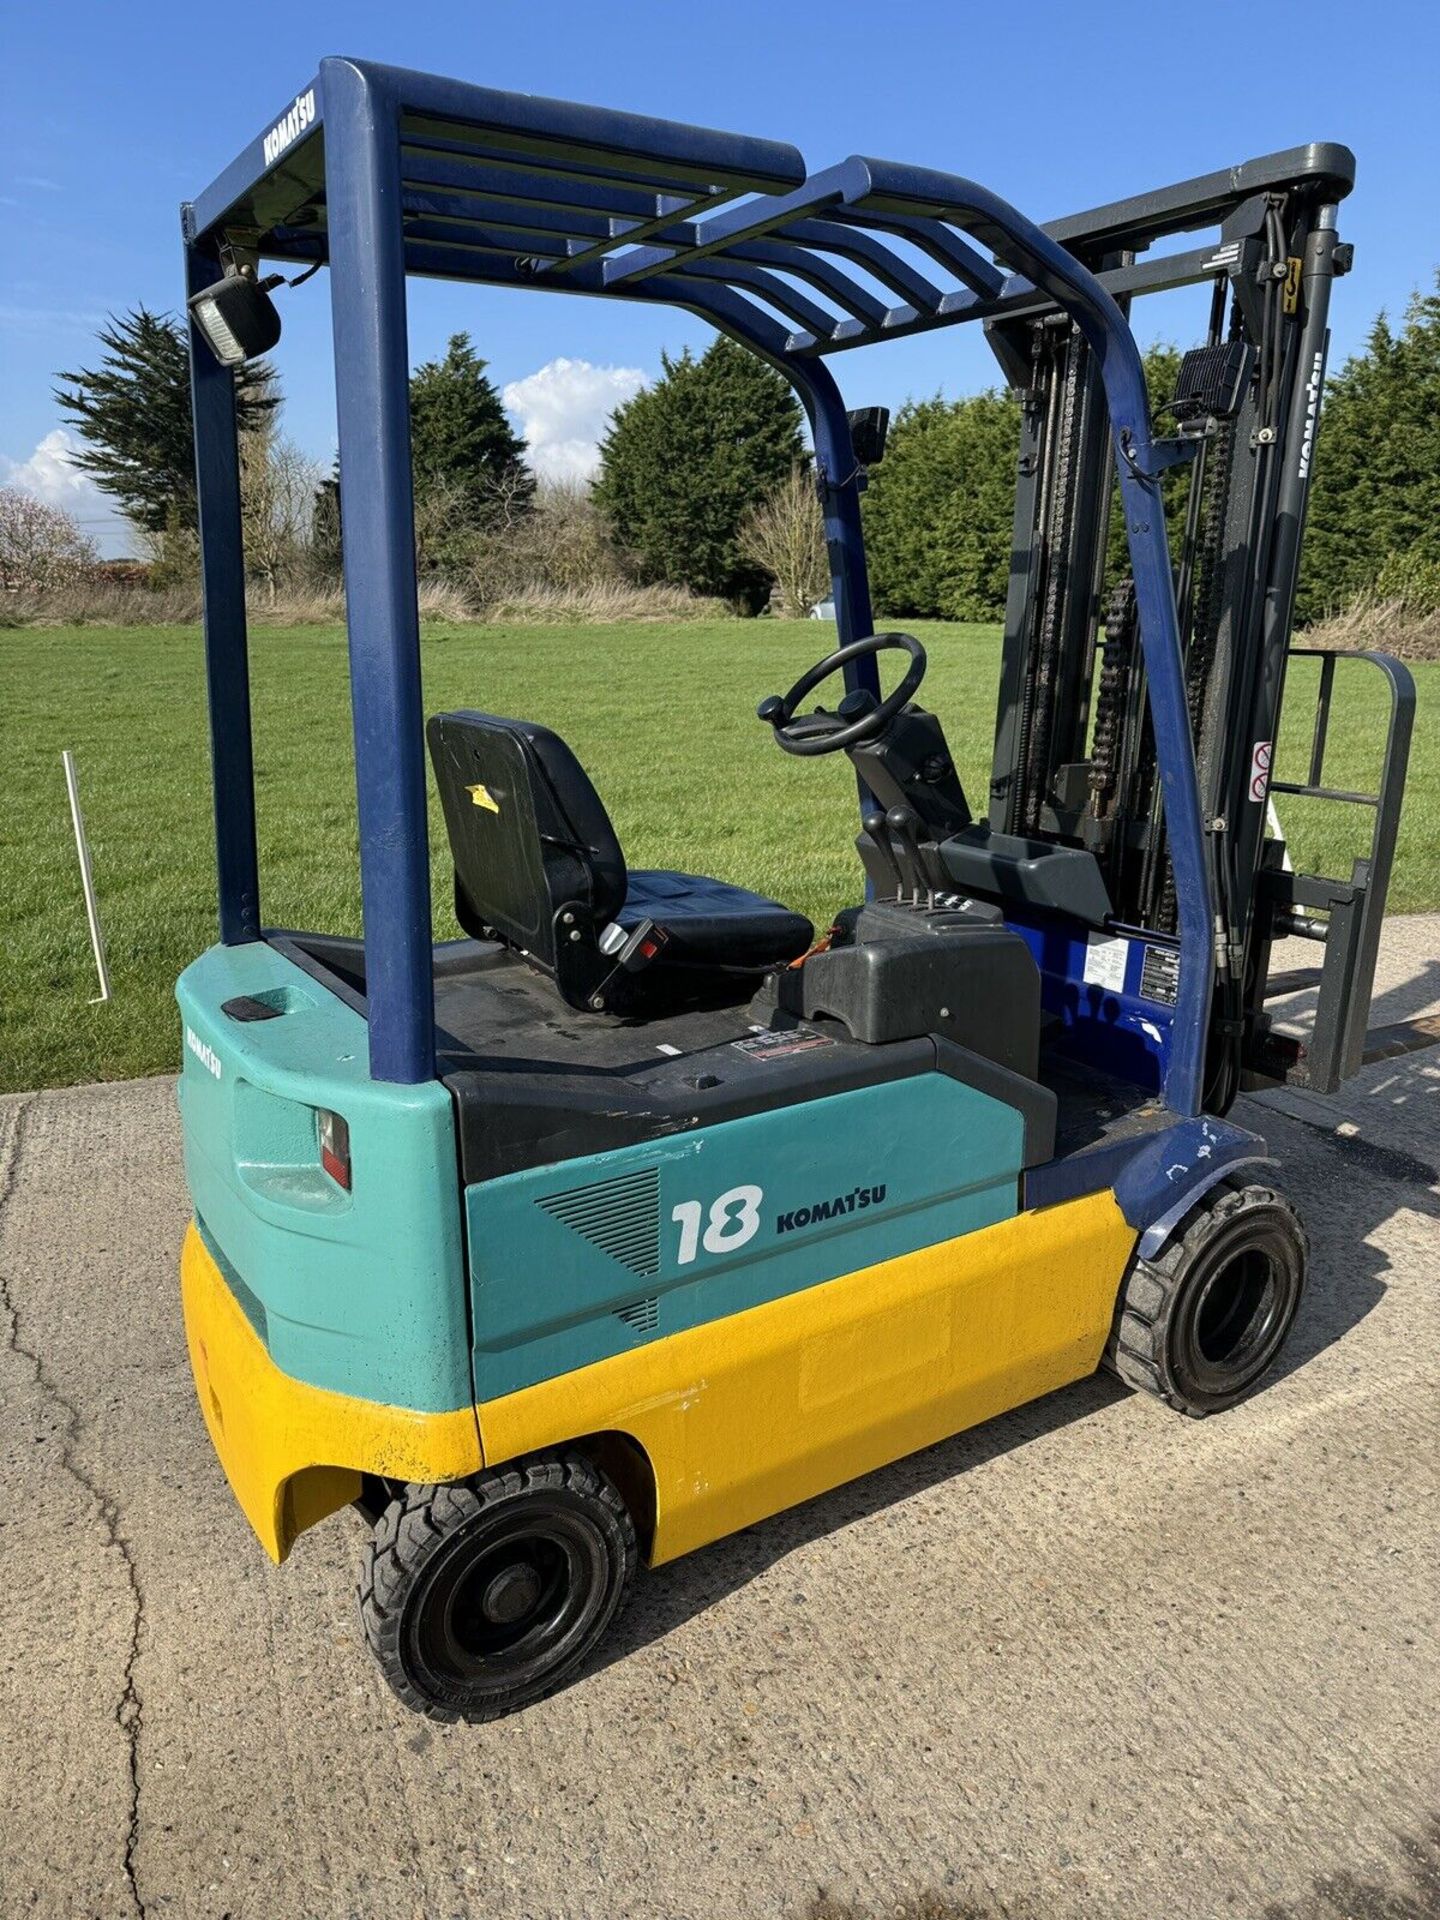 KOMATSU, 1.8 Tonne - Electric Forklift Truck (Container Spec) - Image 4 of 5